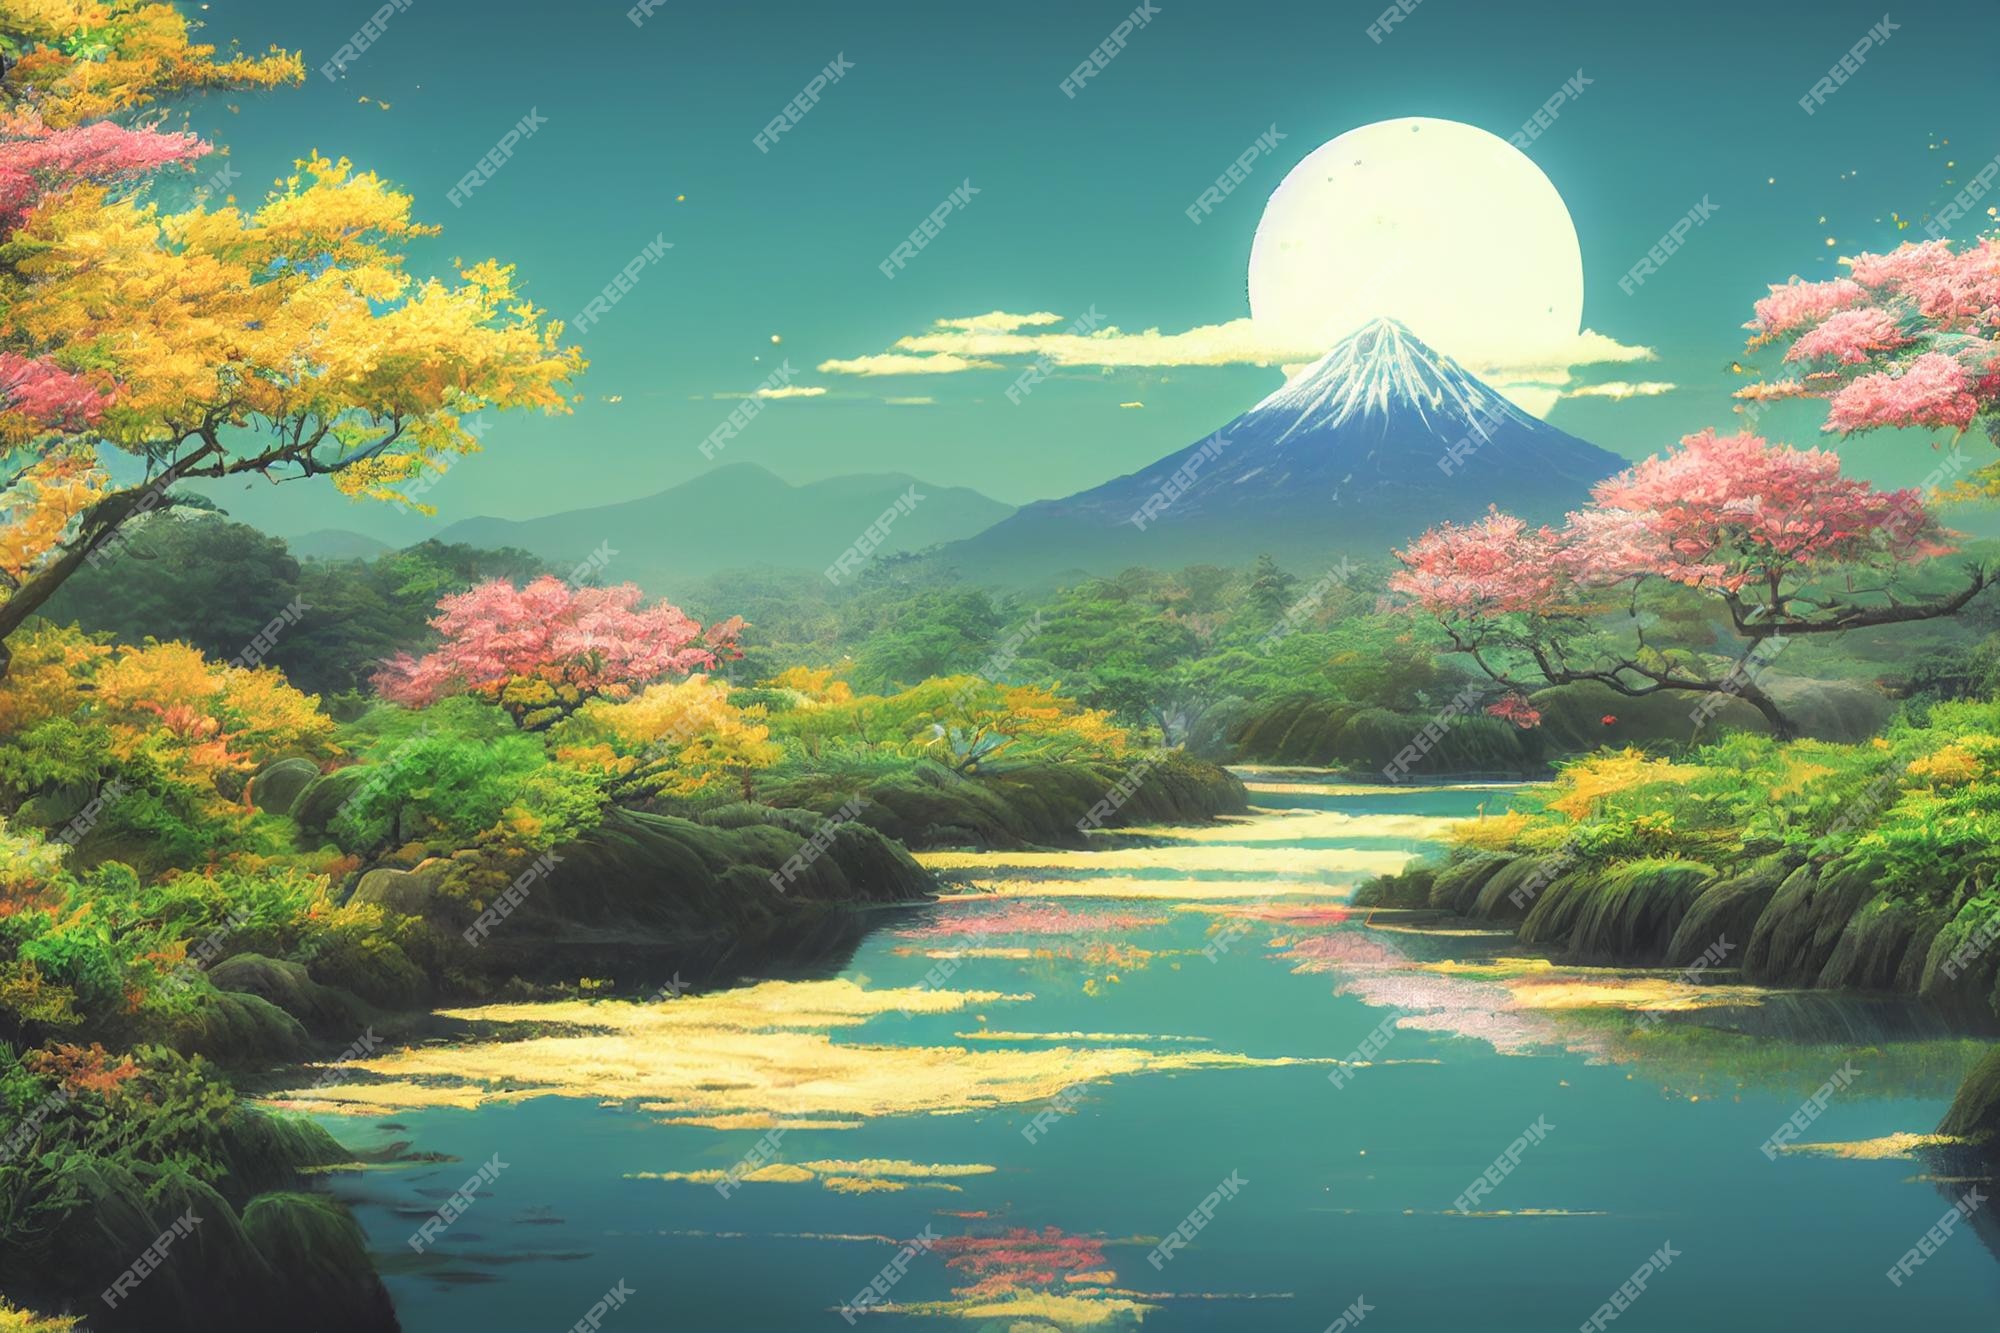 Premium Photo | Japan anime scenery wallpaper featuring beautiful pink  cherry trees and mount fuji in the background